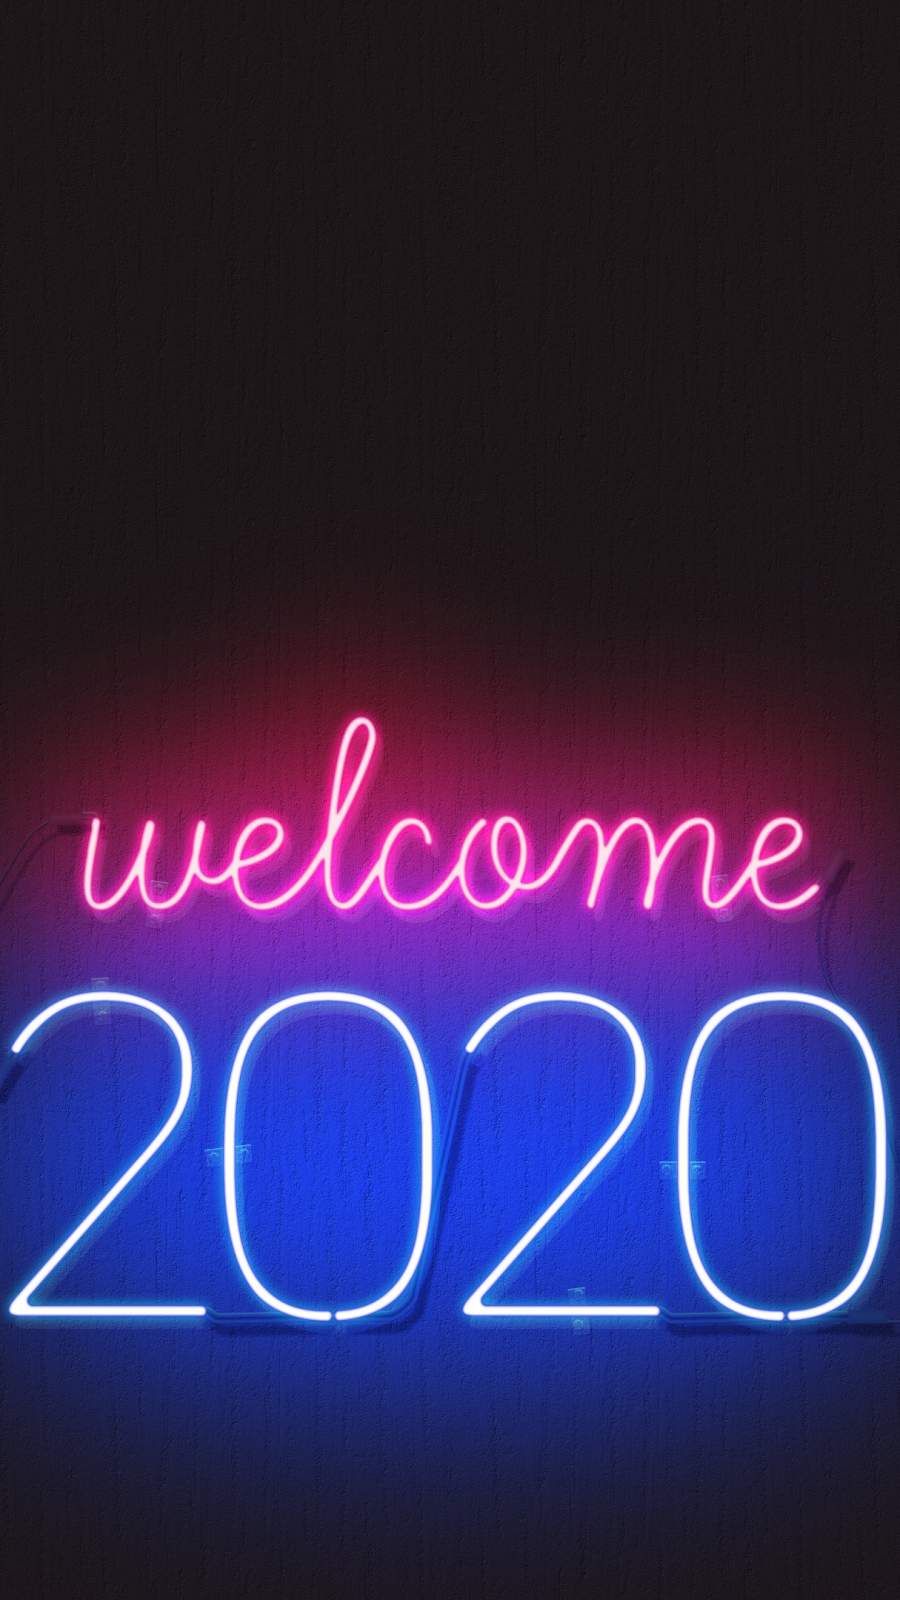 Download Welcome 2020 Happy New year Mobile Wallpaper for your